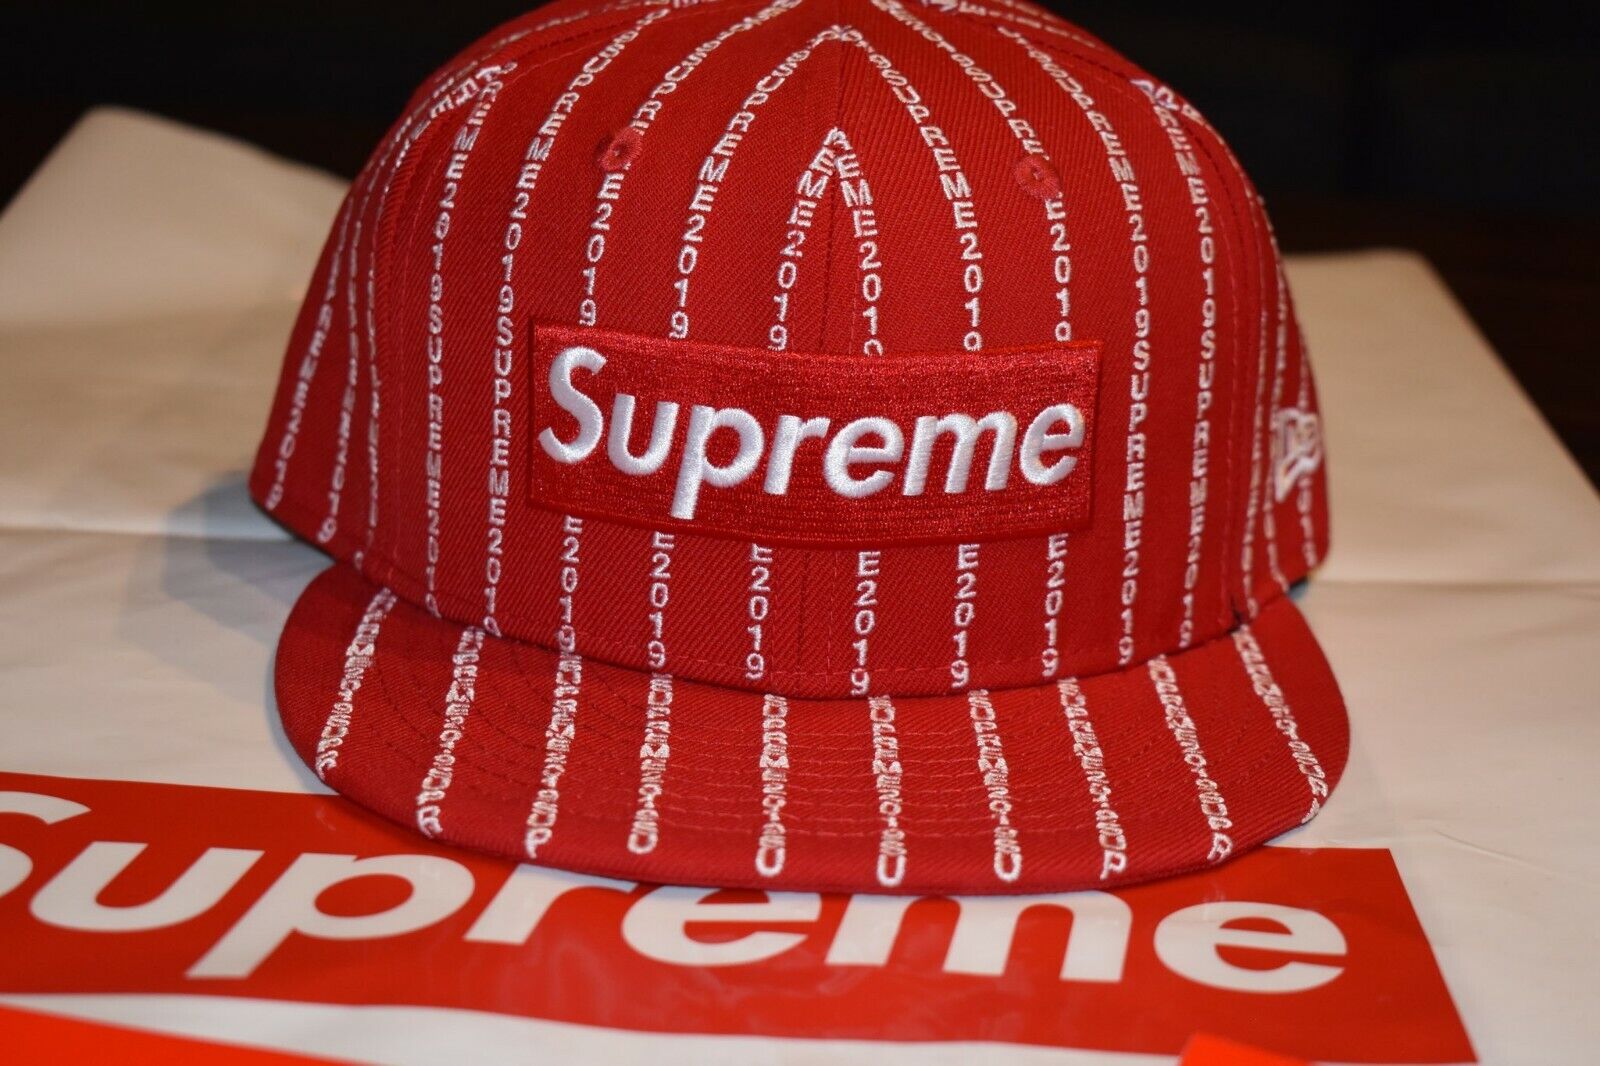 supreme fitted hat 7 1/2 | eBay